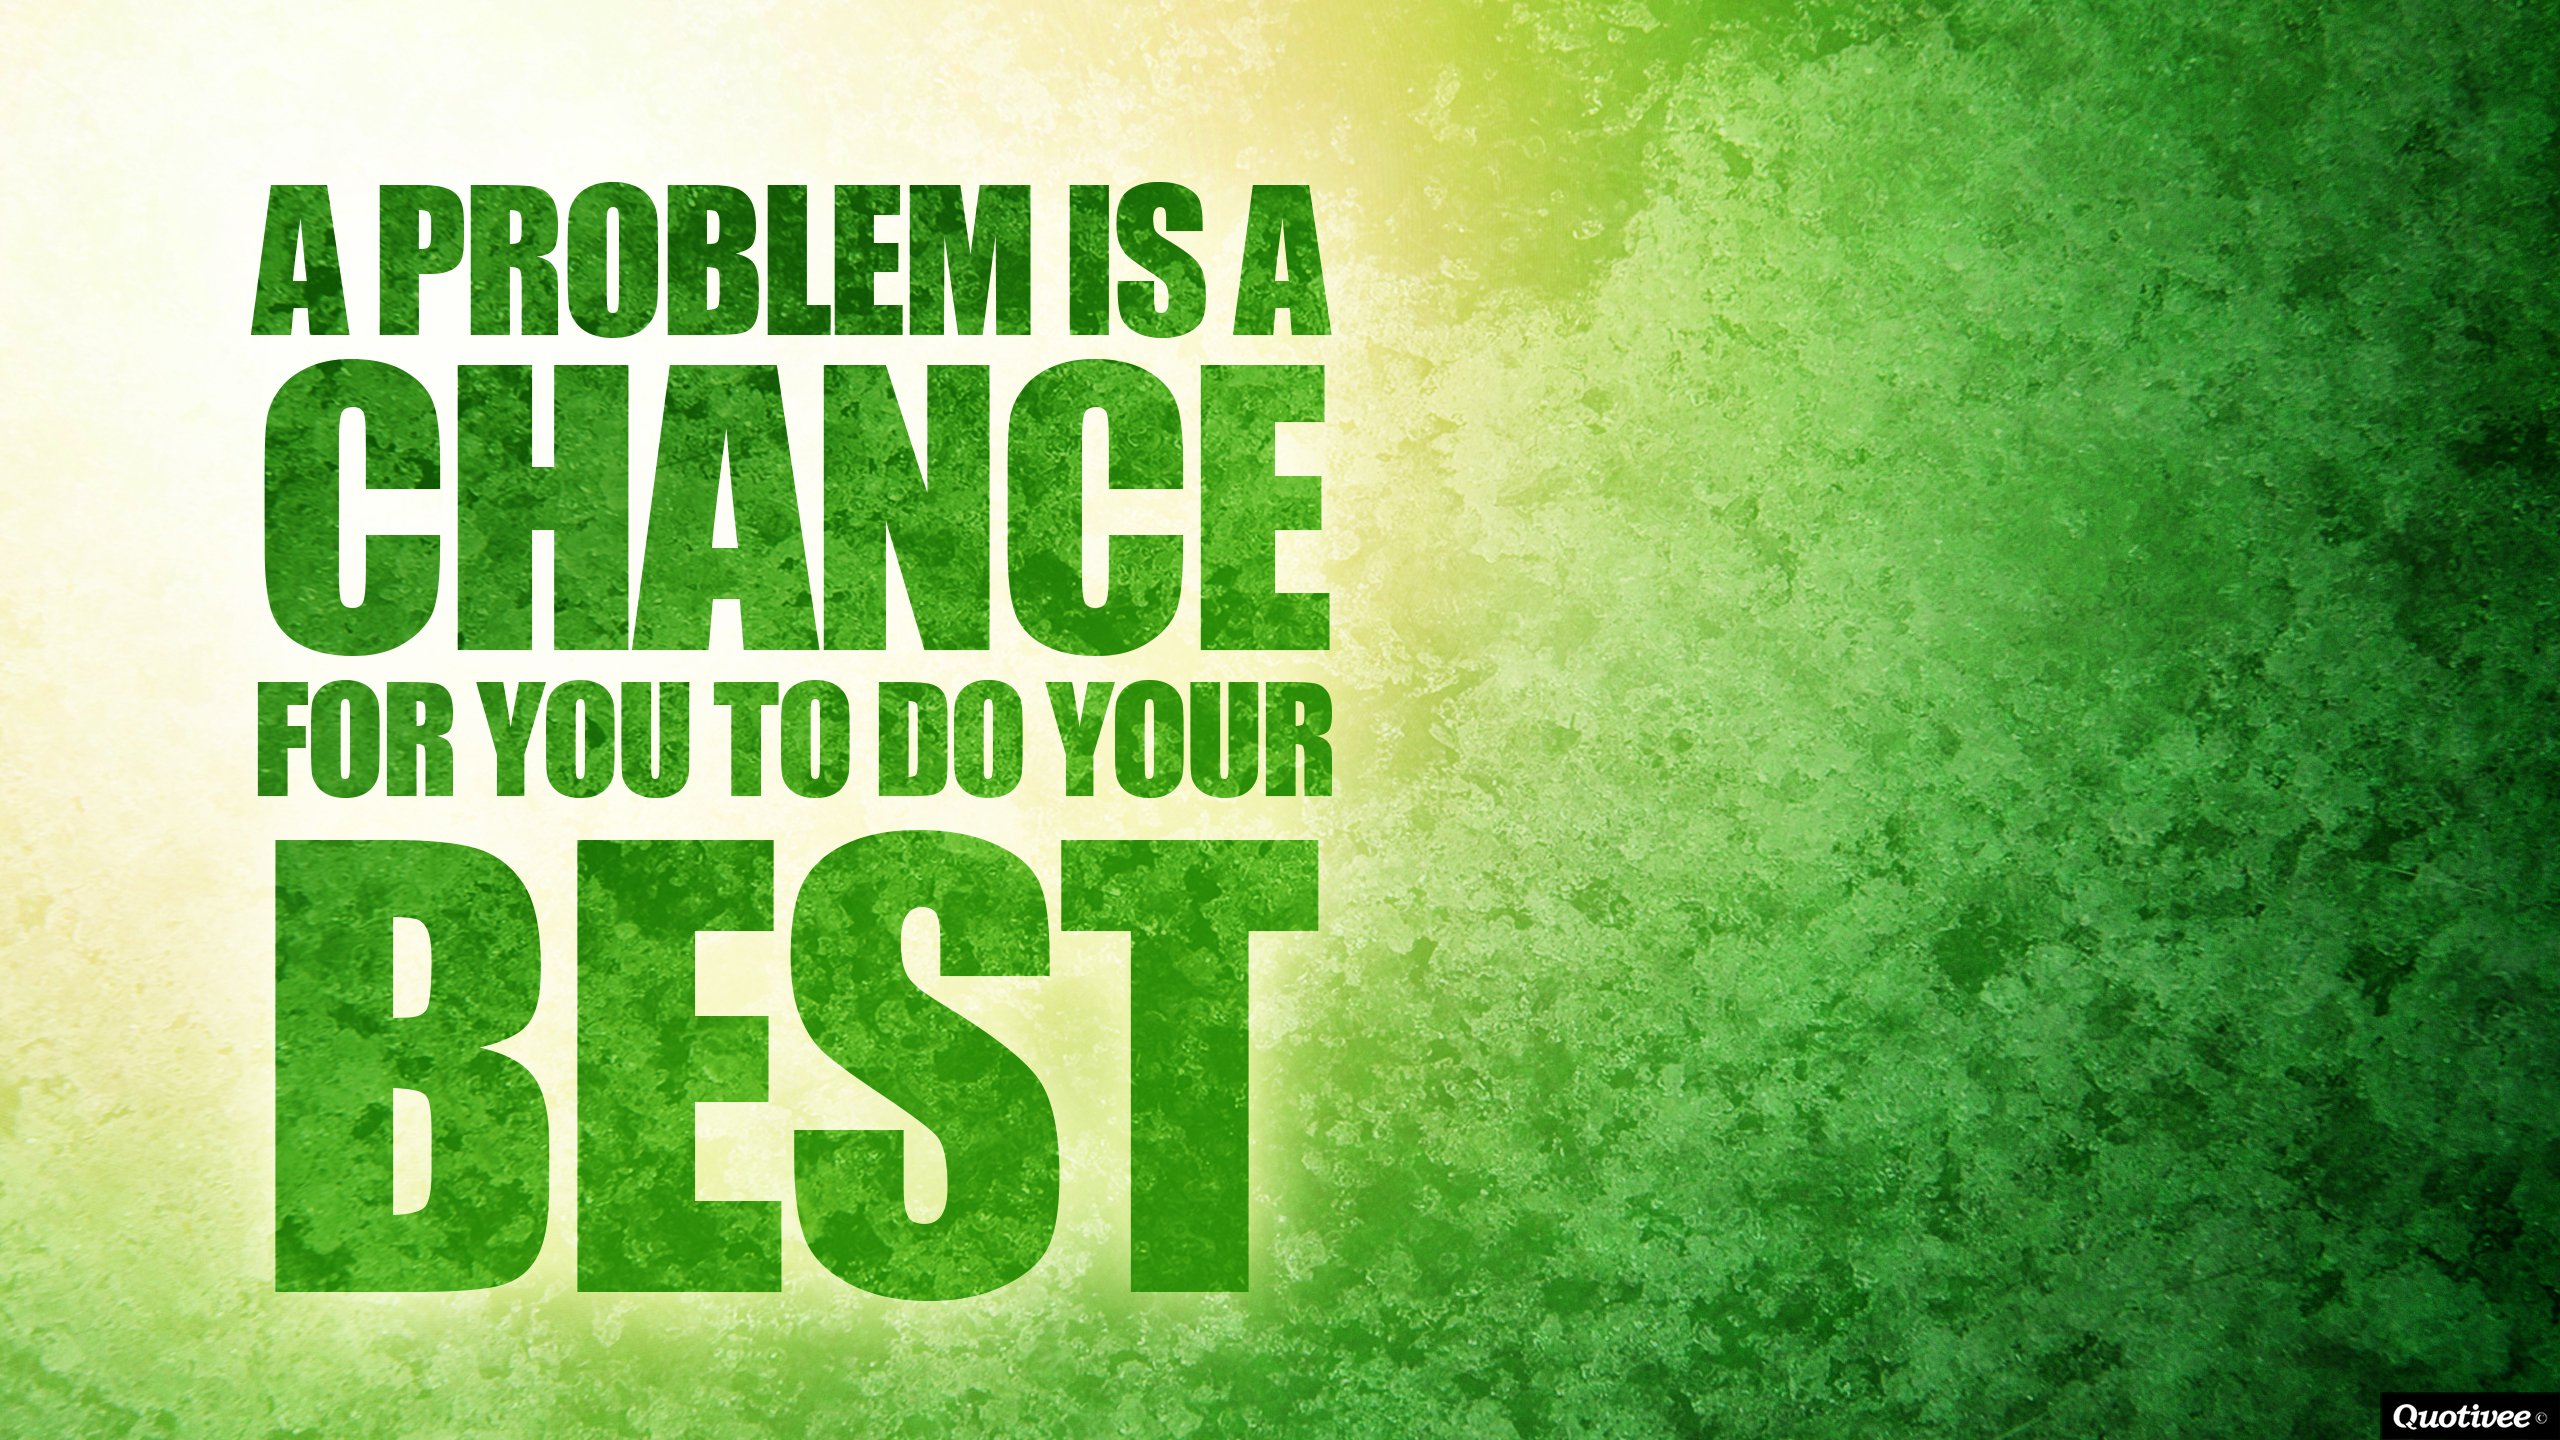 Do Your Best Quotes wallpaper   1303601